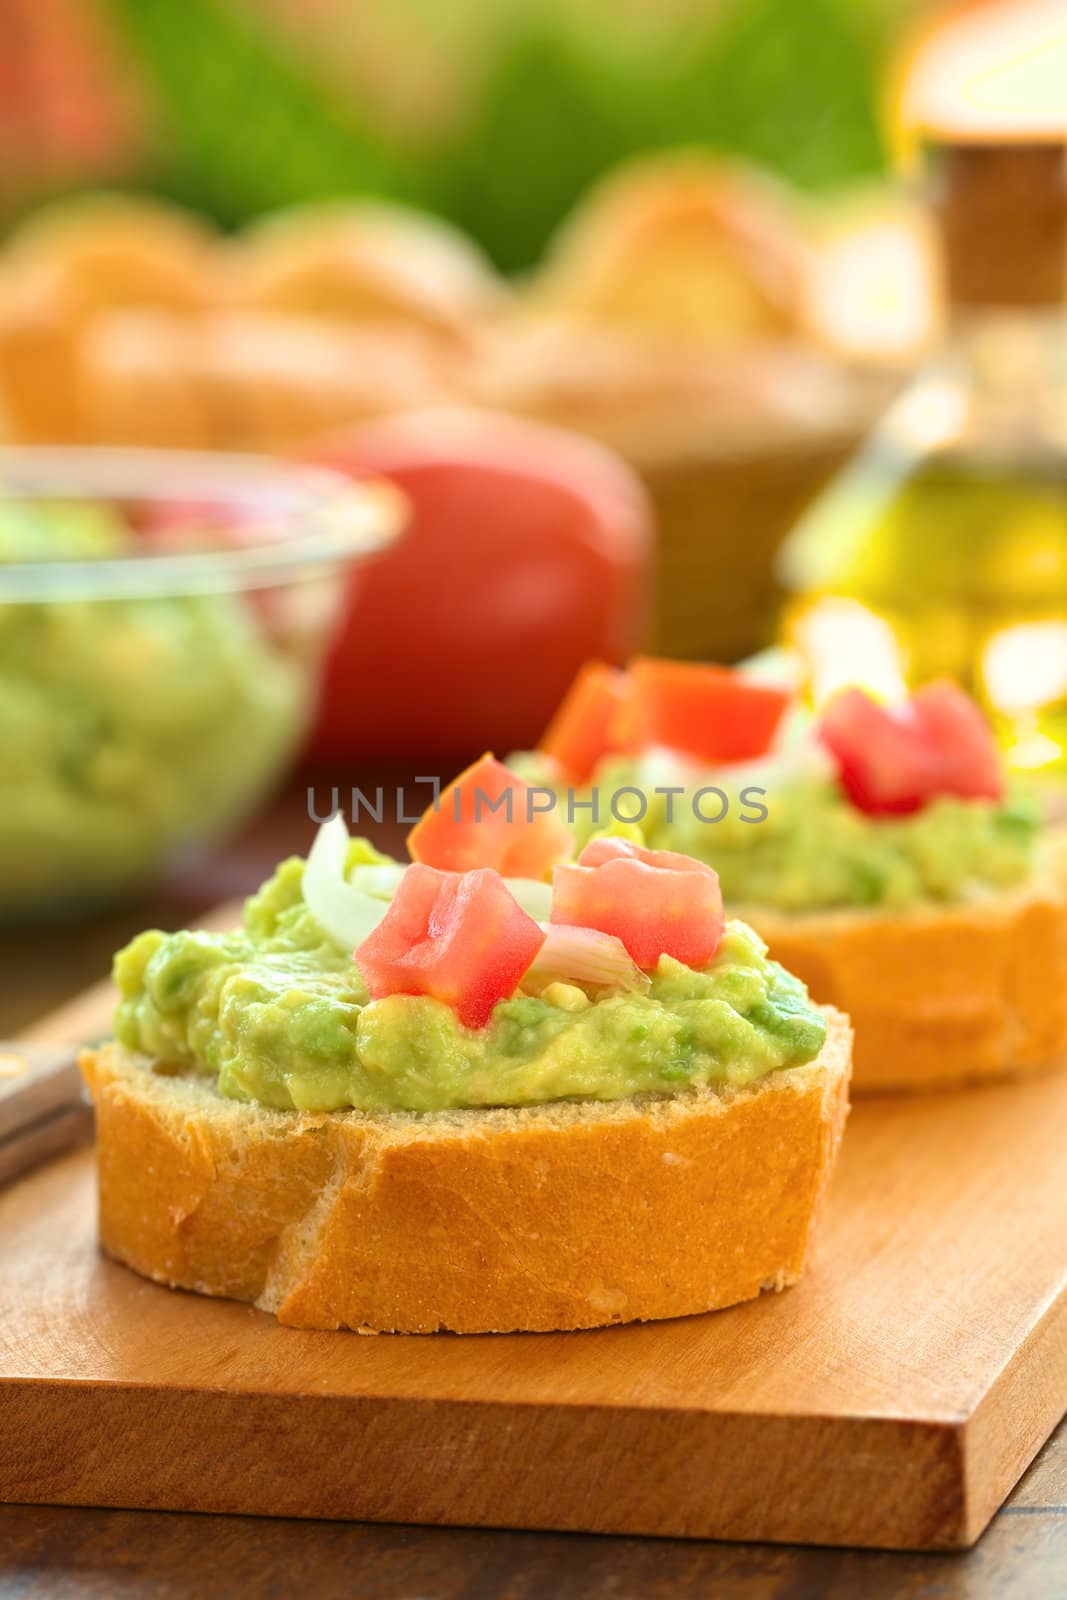 Baguette with Avocado by ildi